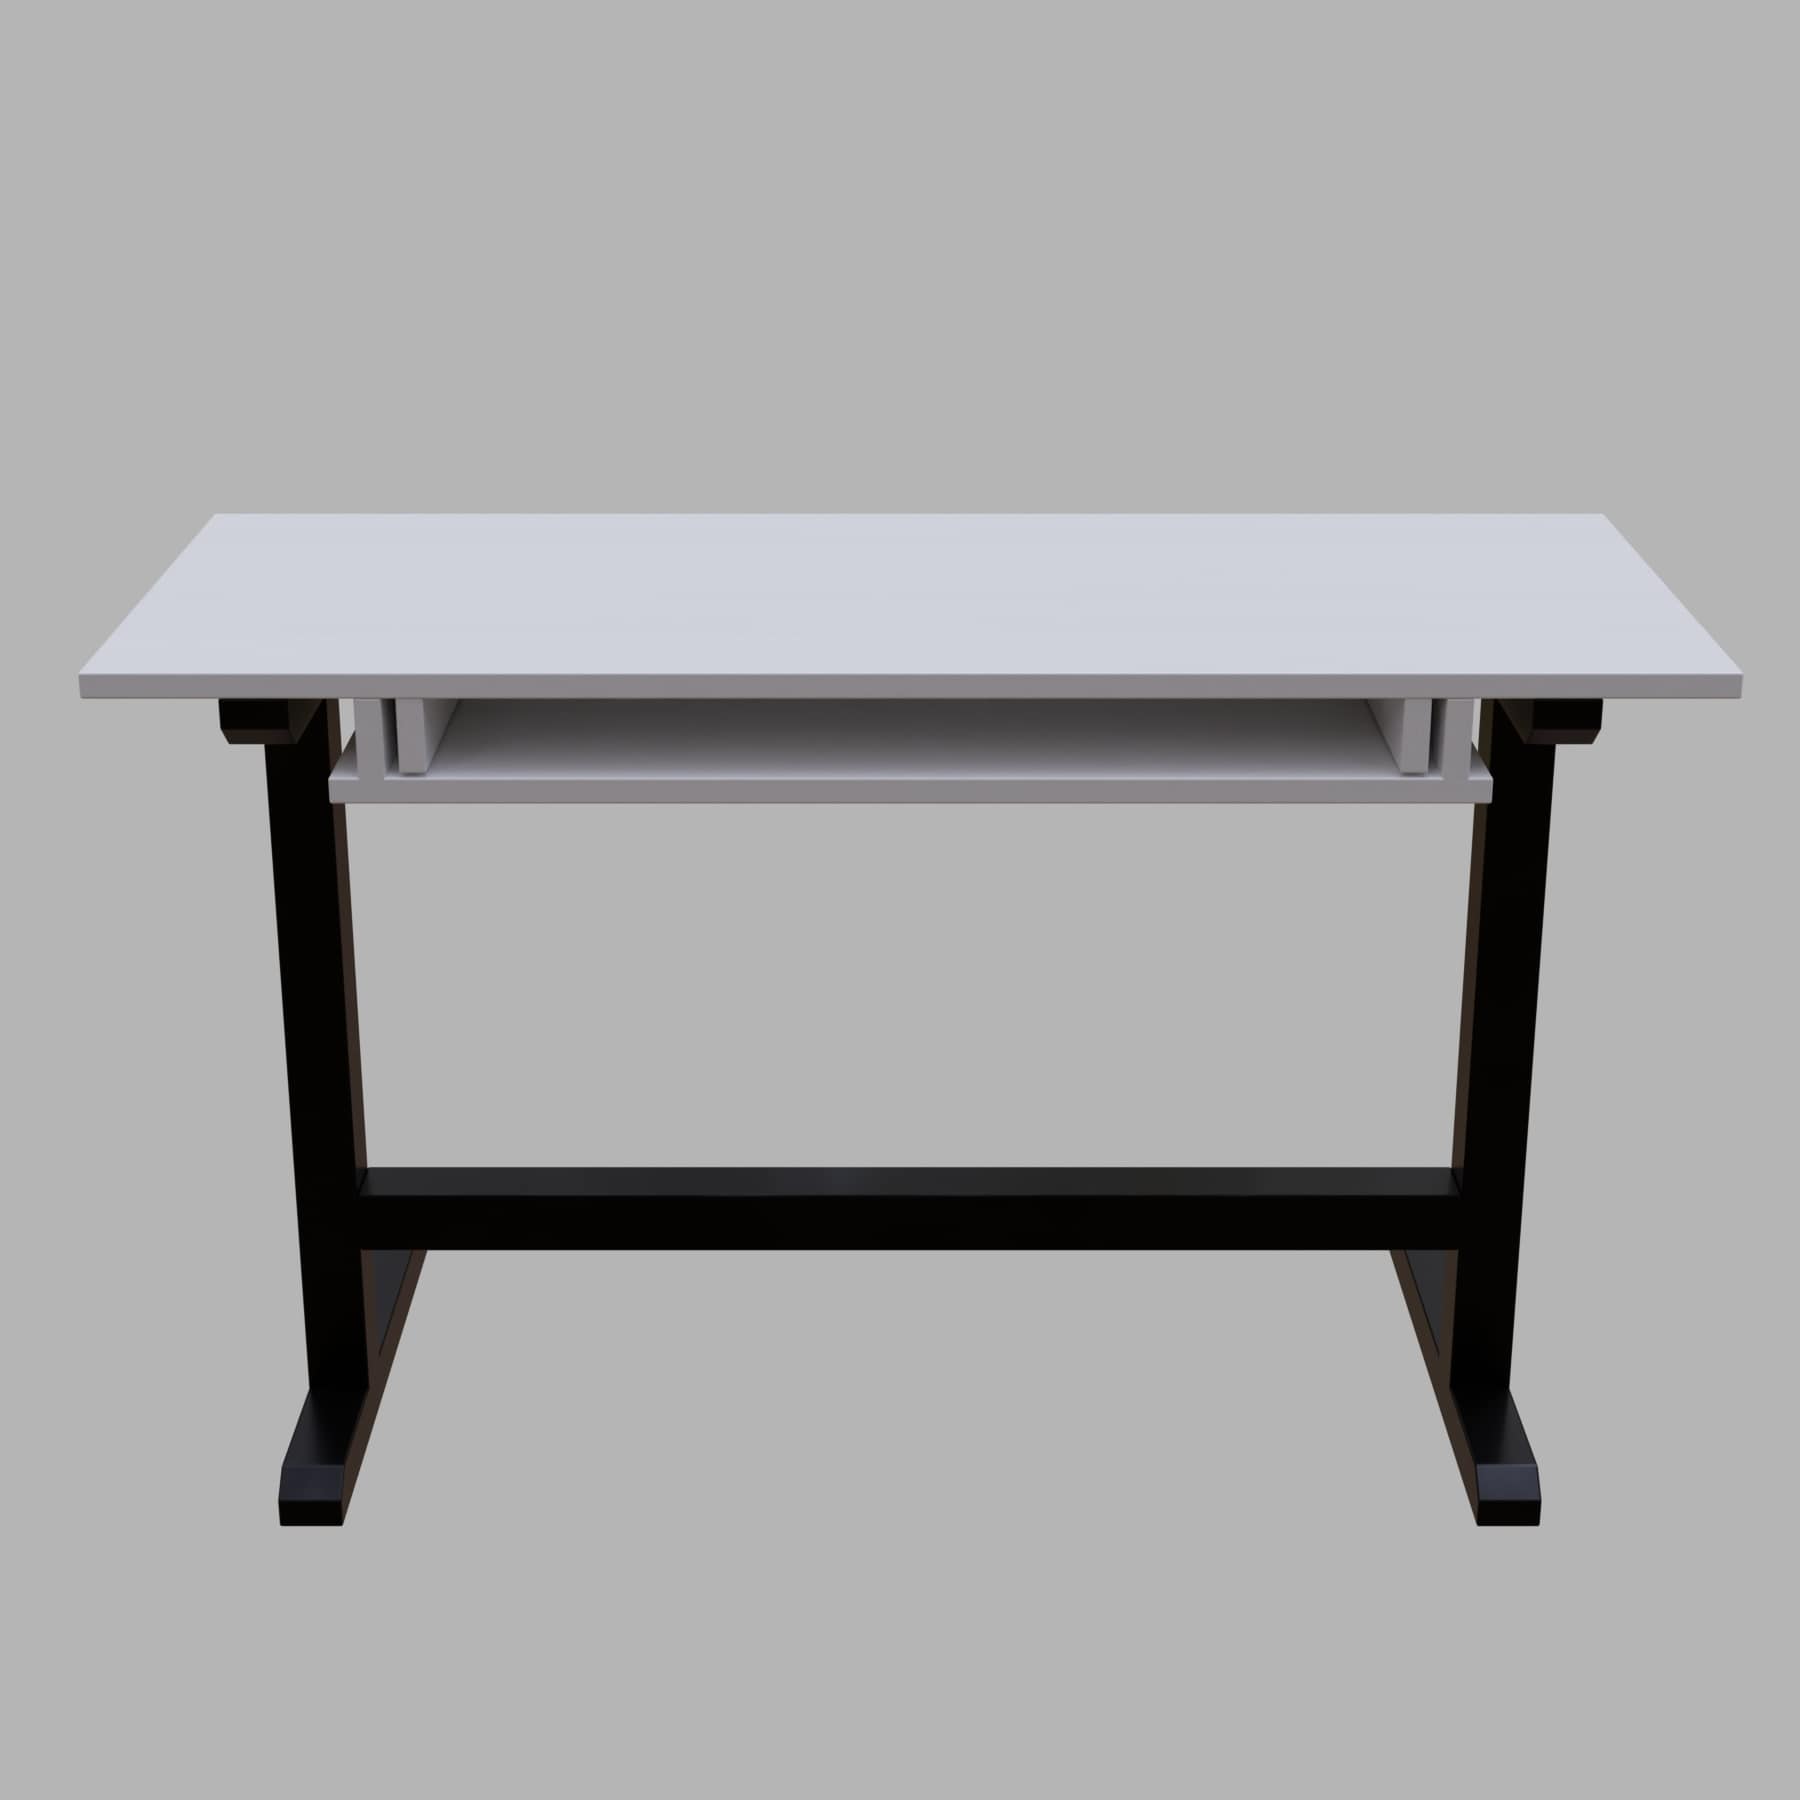 Zinnia Study Table with Keyboard Tray in White Color